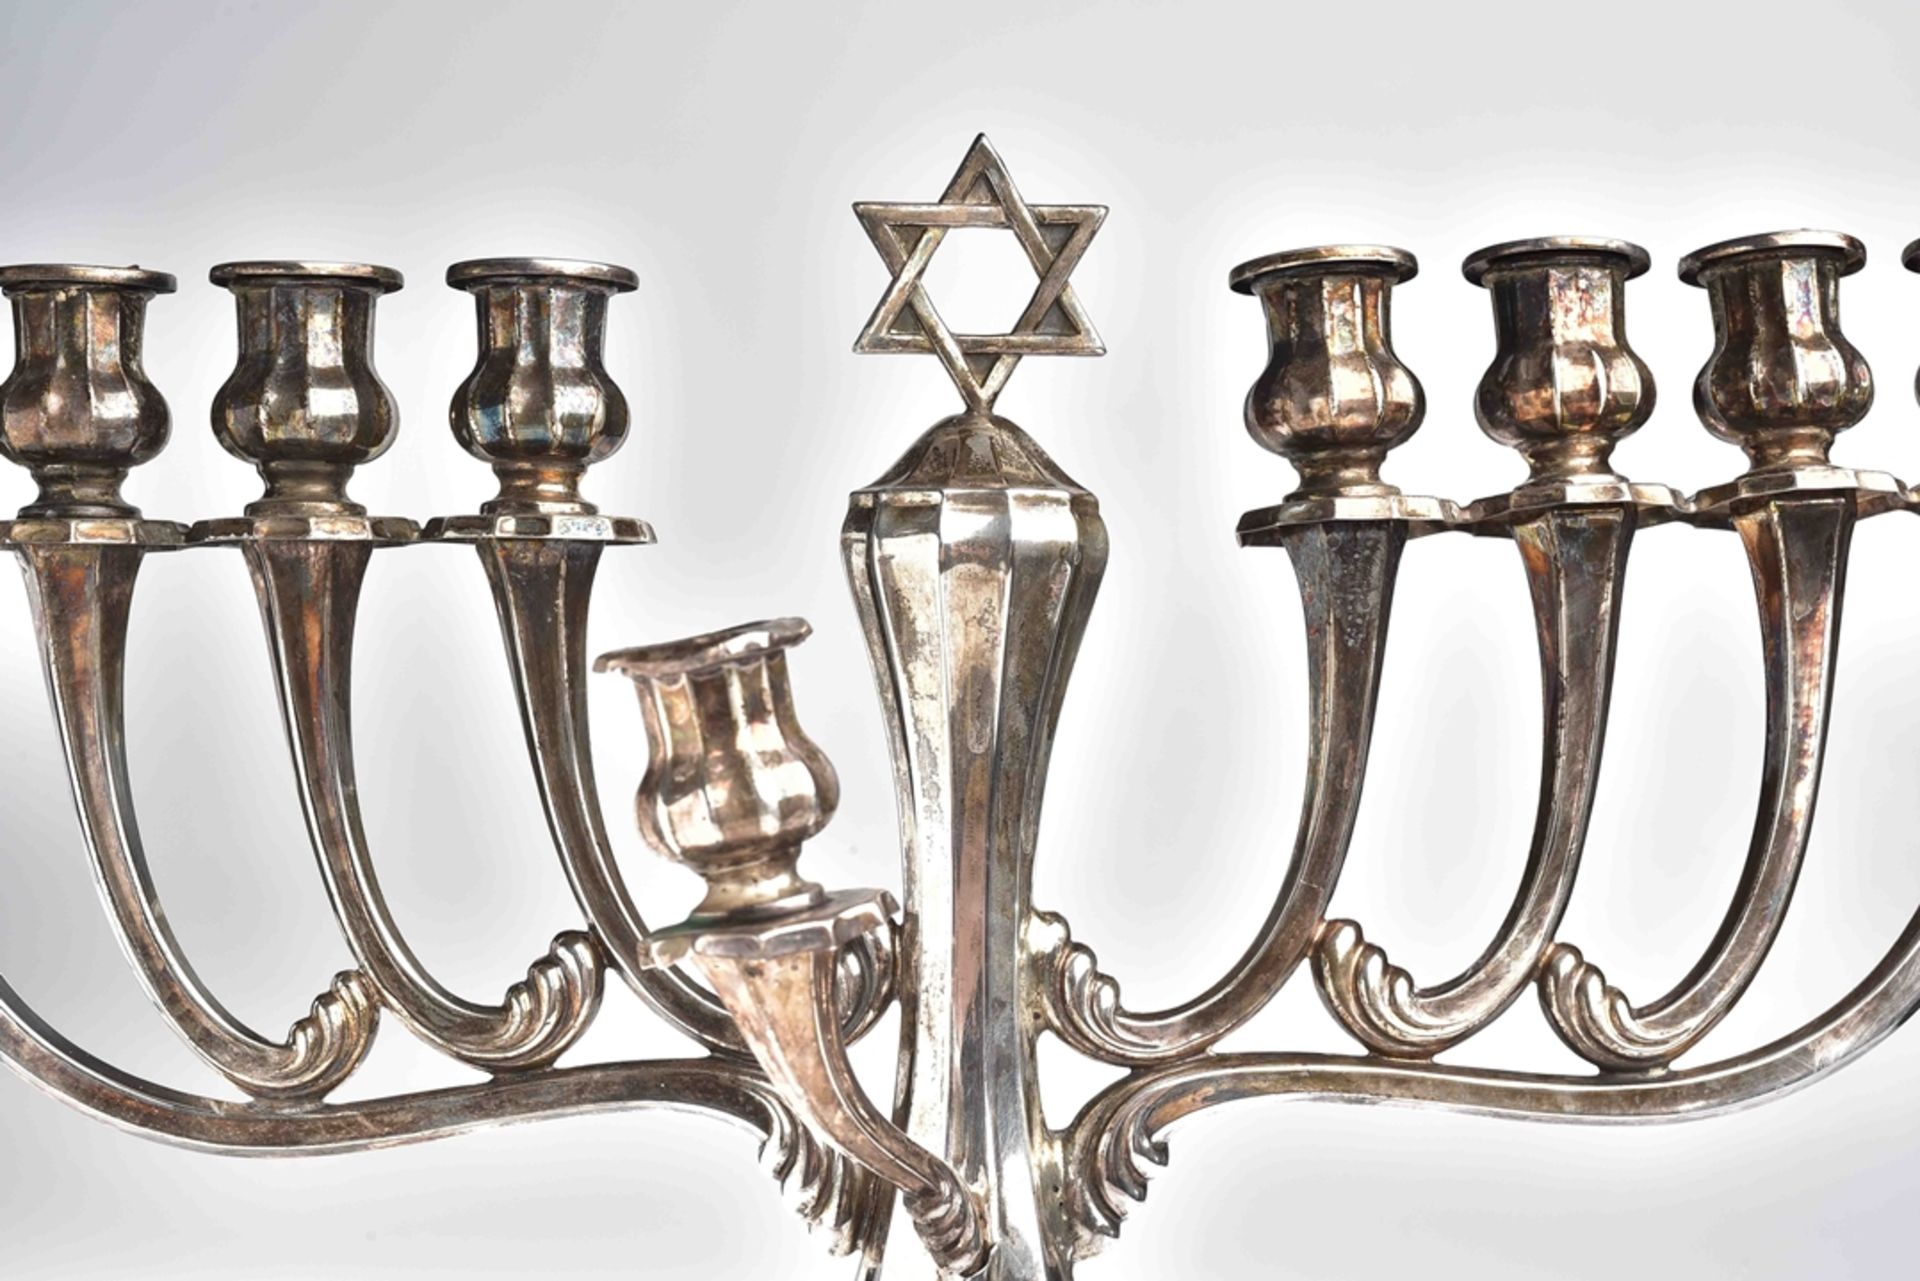 Hanukkah candlestick, Germany c. 1920/30, silver, 925 sterling silver hallmarked, master's mark (il - Image 3 of 4